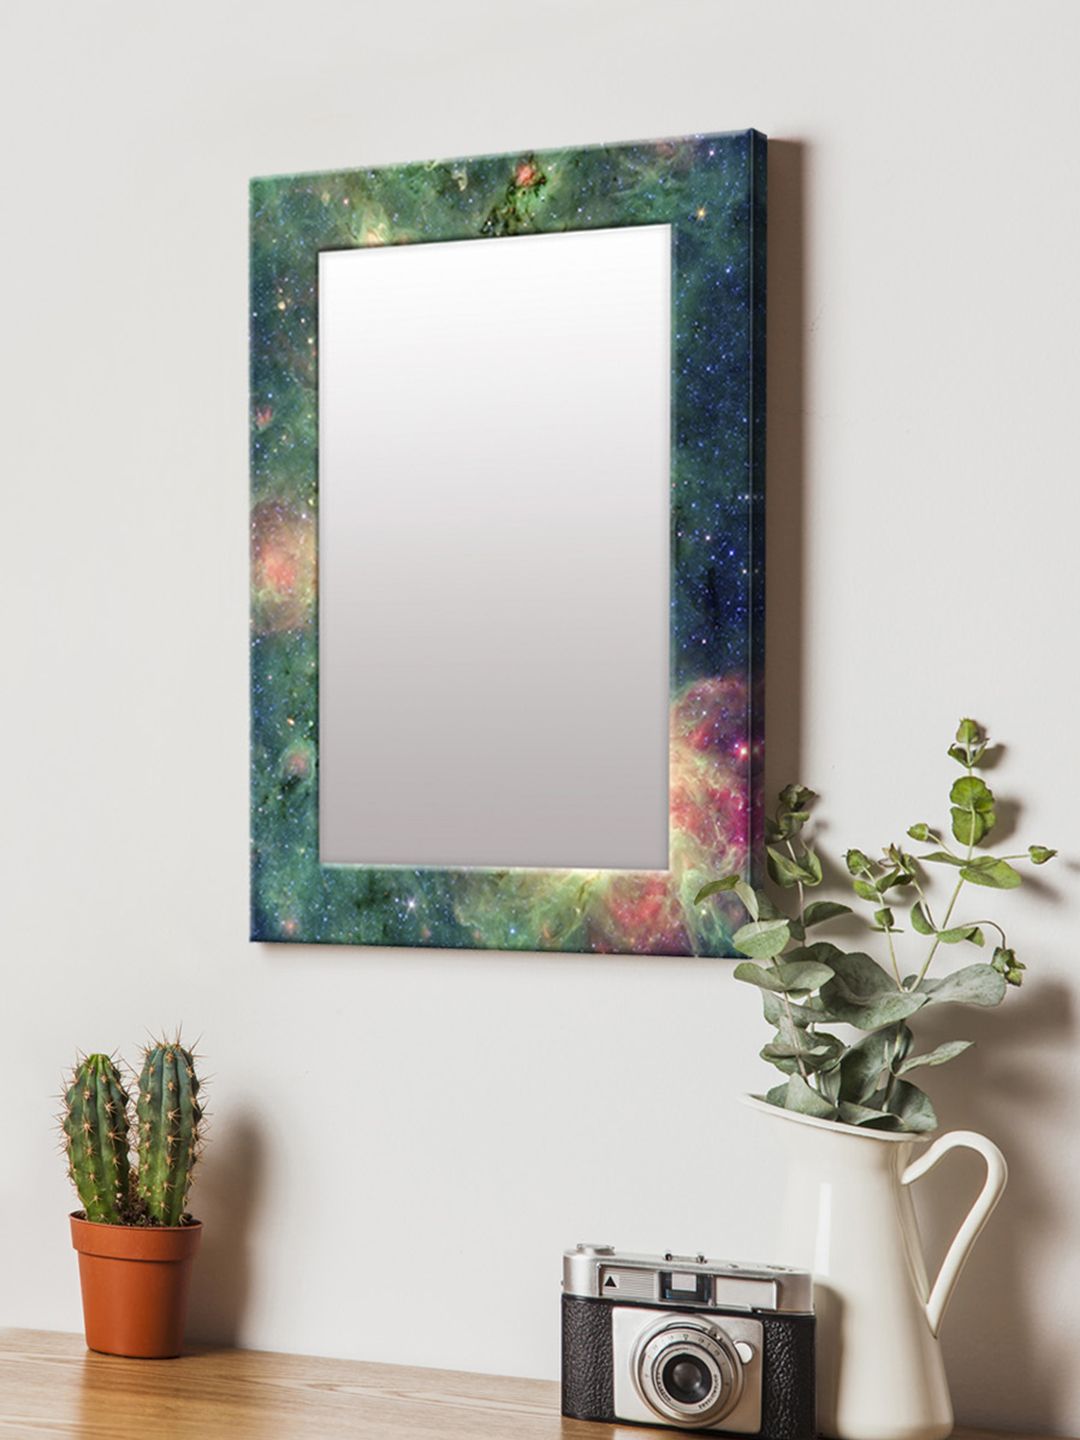 999Store Green & Blue Printed MDF Wall Mirror Price in India